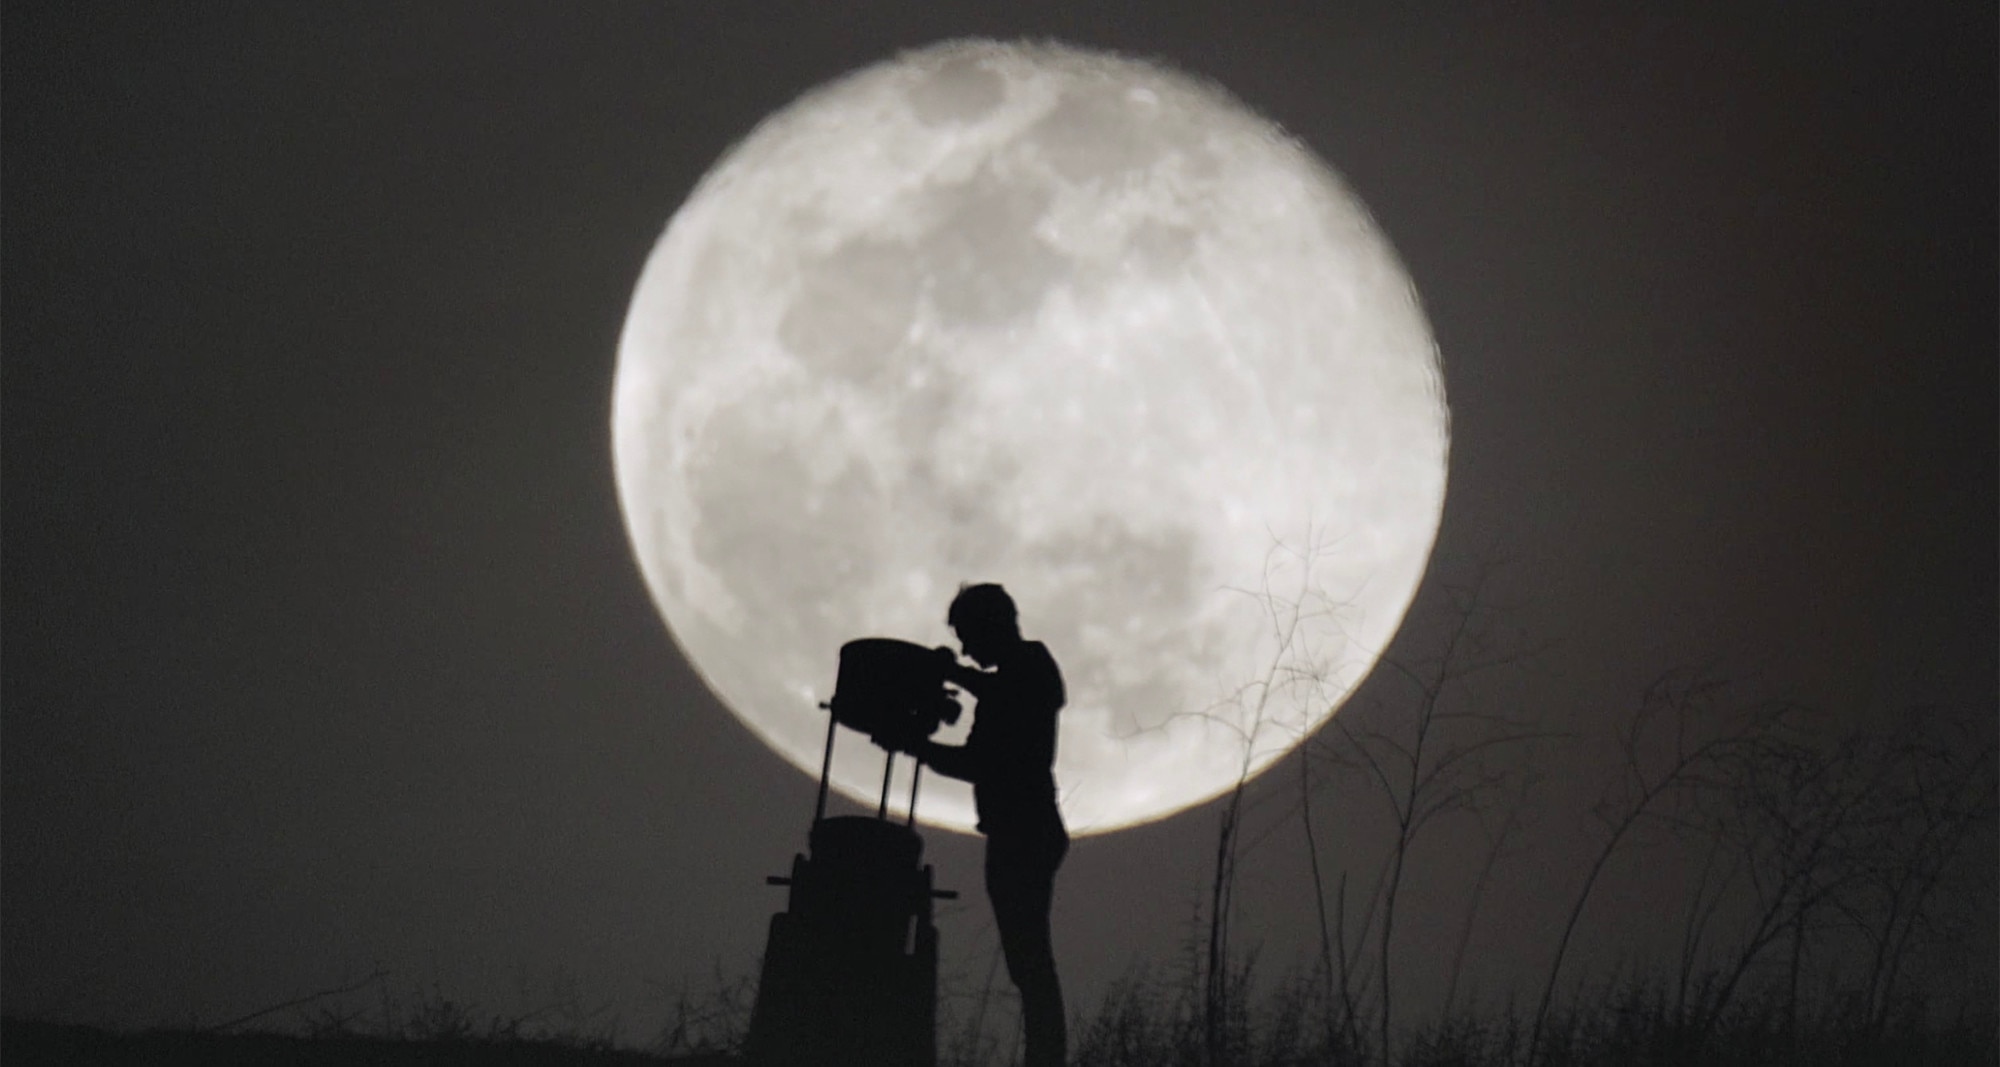 Wylie Overstreet shuts down his telescope after viewing the Moon. Credit: Wylie Overstreet and Alex Gorosh